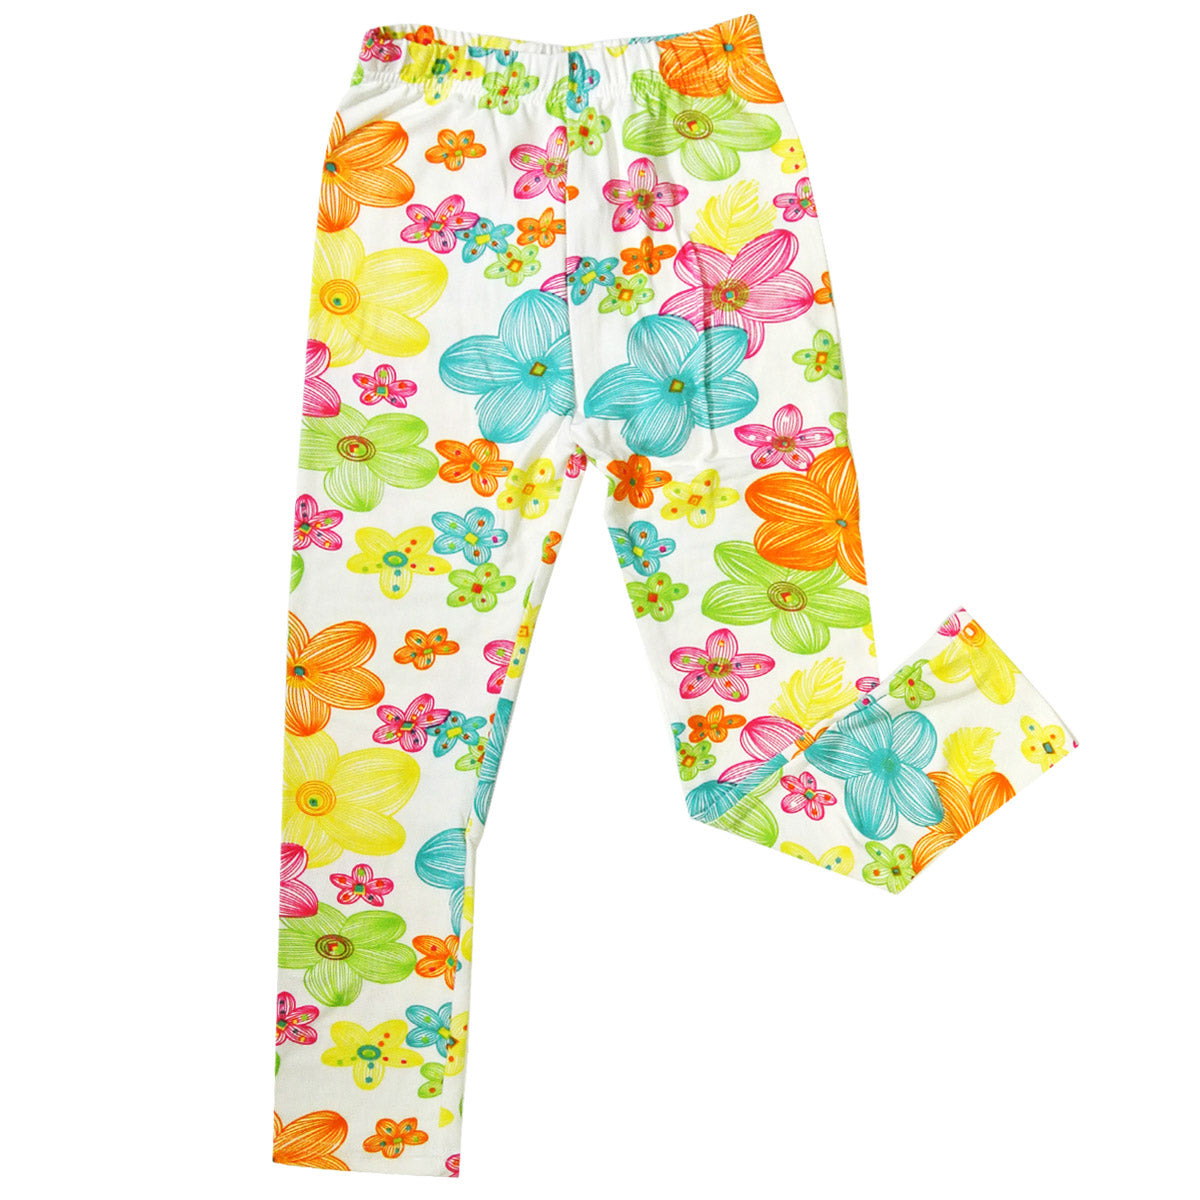 Wrapables Doodle and Floral Print Toddler Leggings Set of 2, White (Size 5)